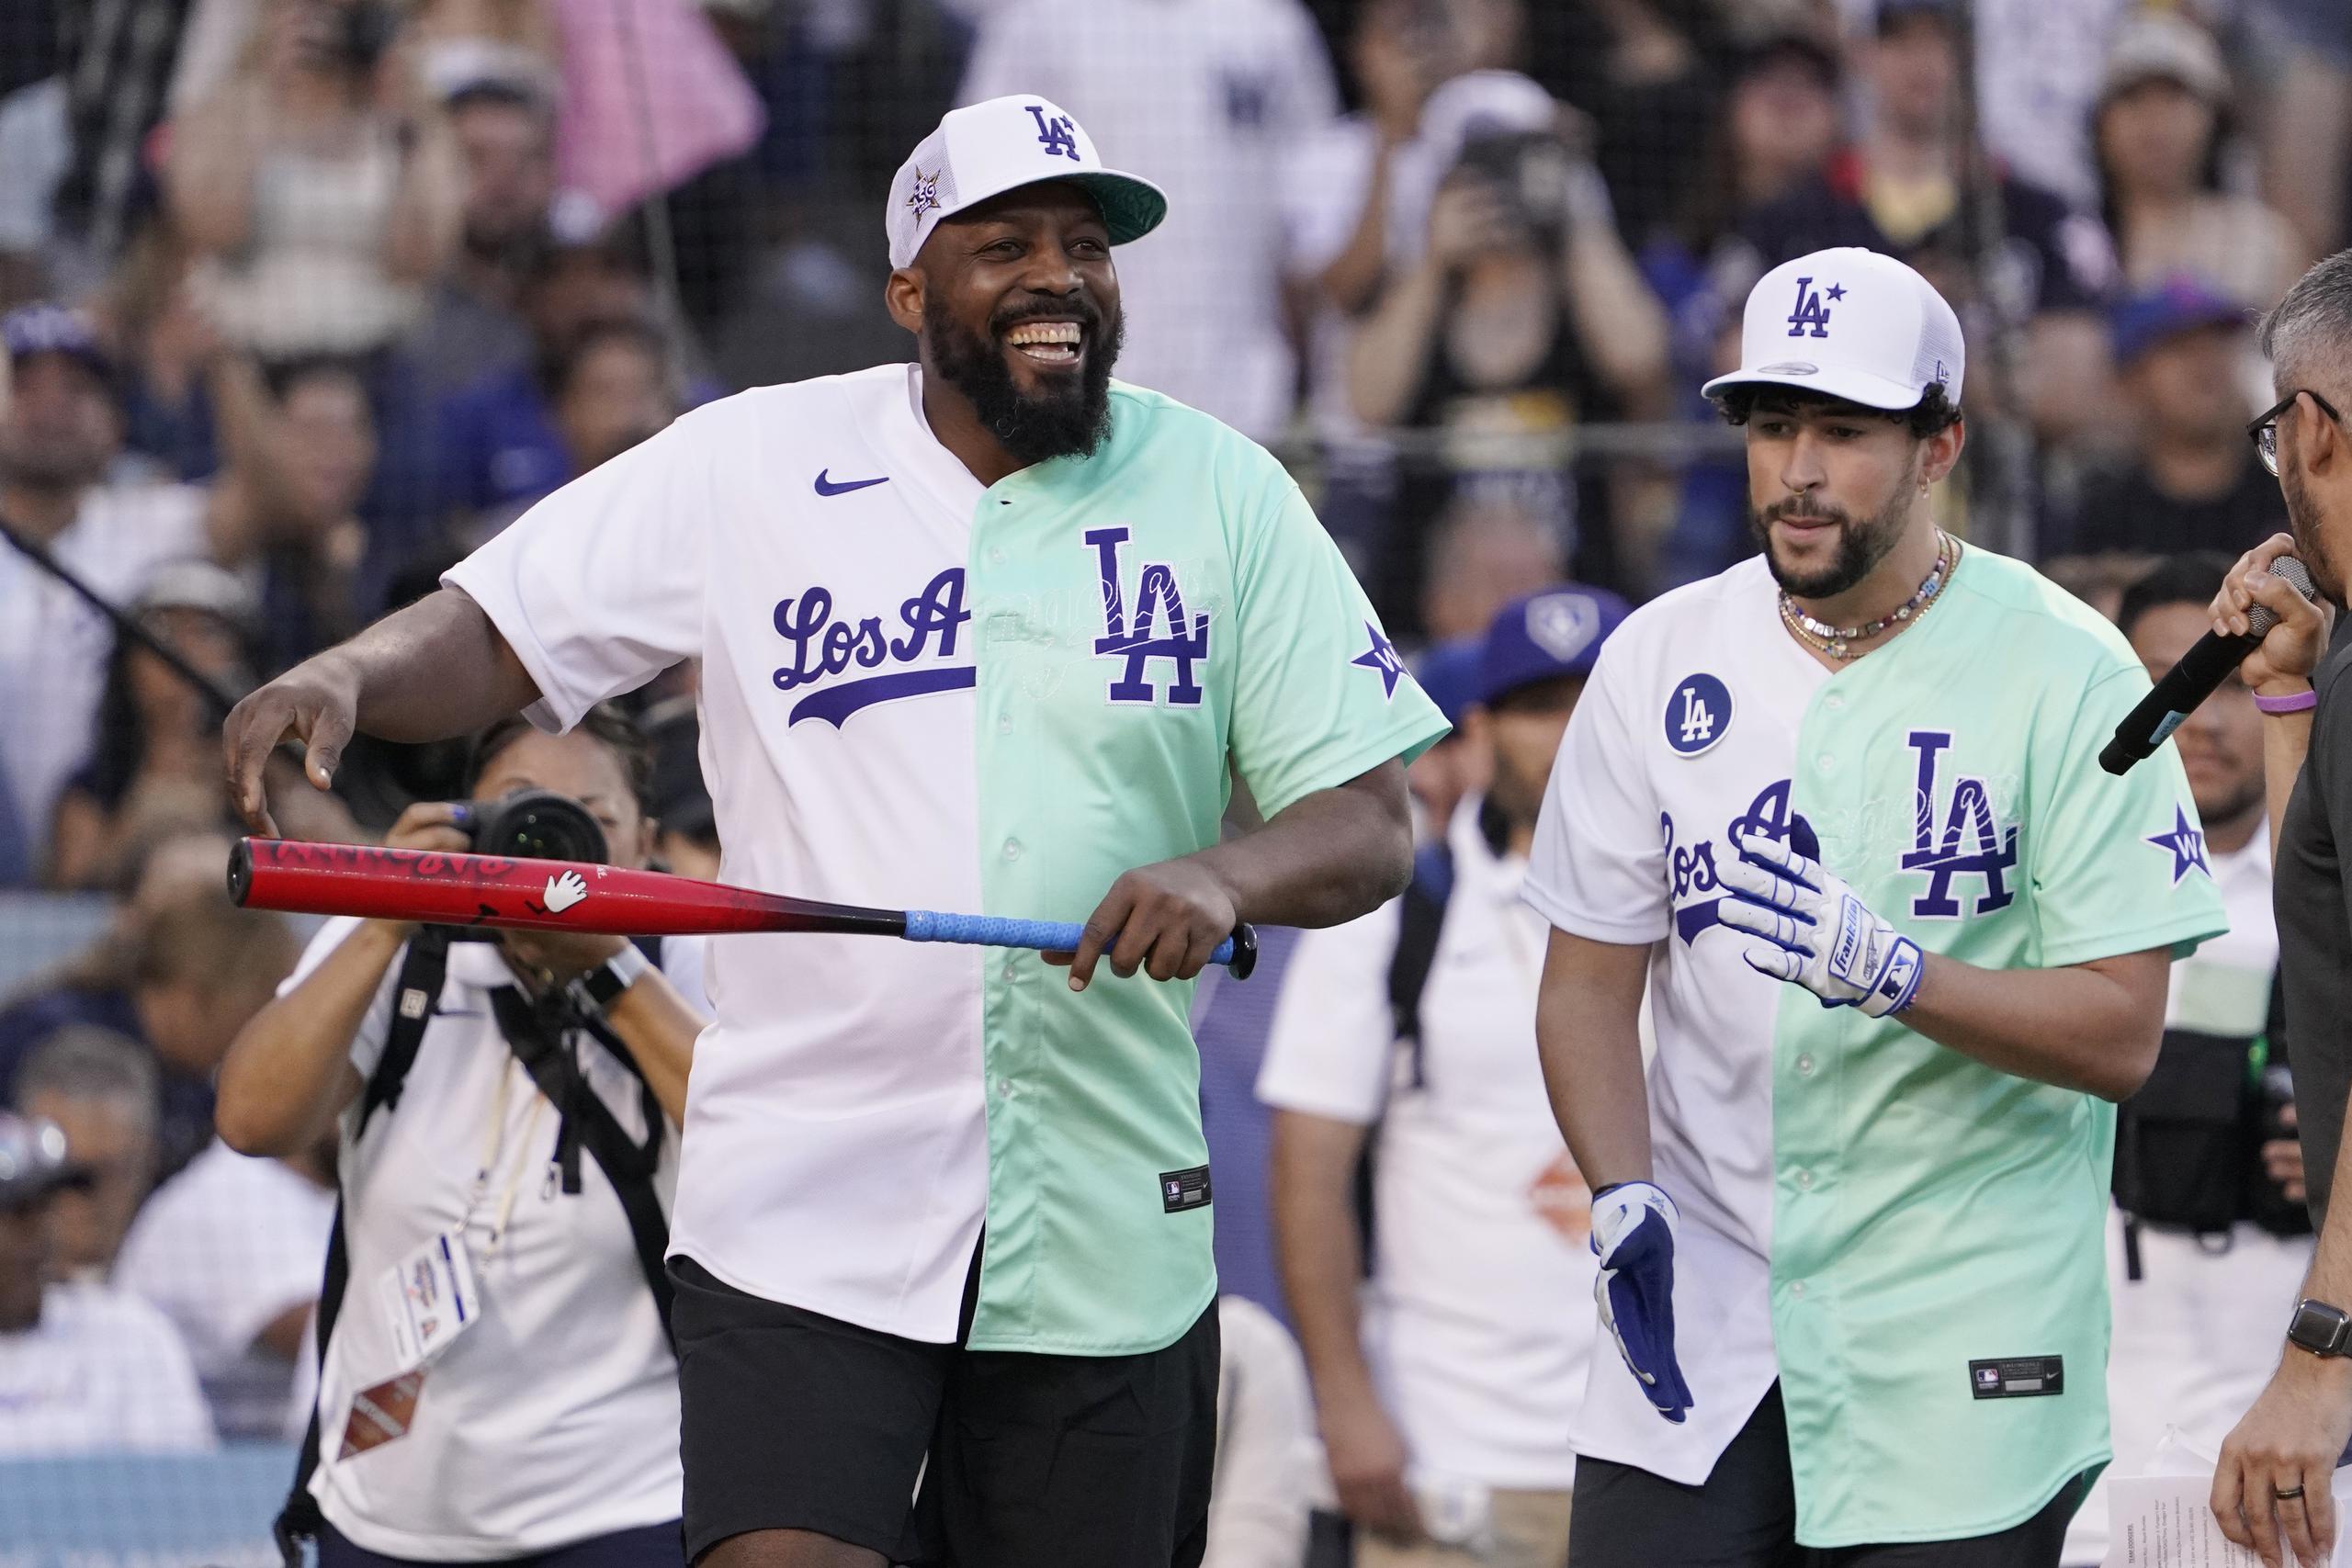 Former Major League Baseball player Vladimir Guerrero smiles next to Rapper and Singer Bad Bunny during the MLB All Star Celebrity Softball game, Saturday, July 16, 2022, in Los Angeles. (AP Photo/Mark J. Terrill)